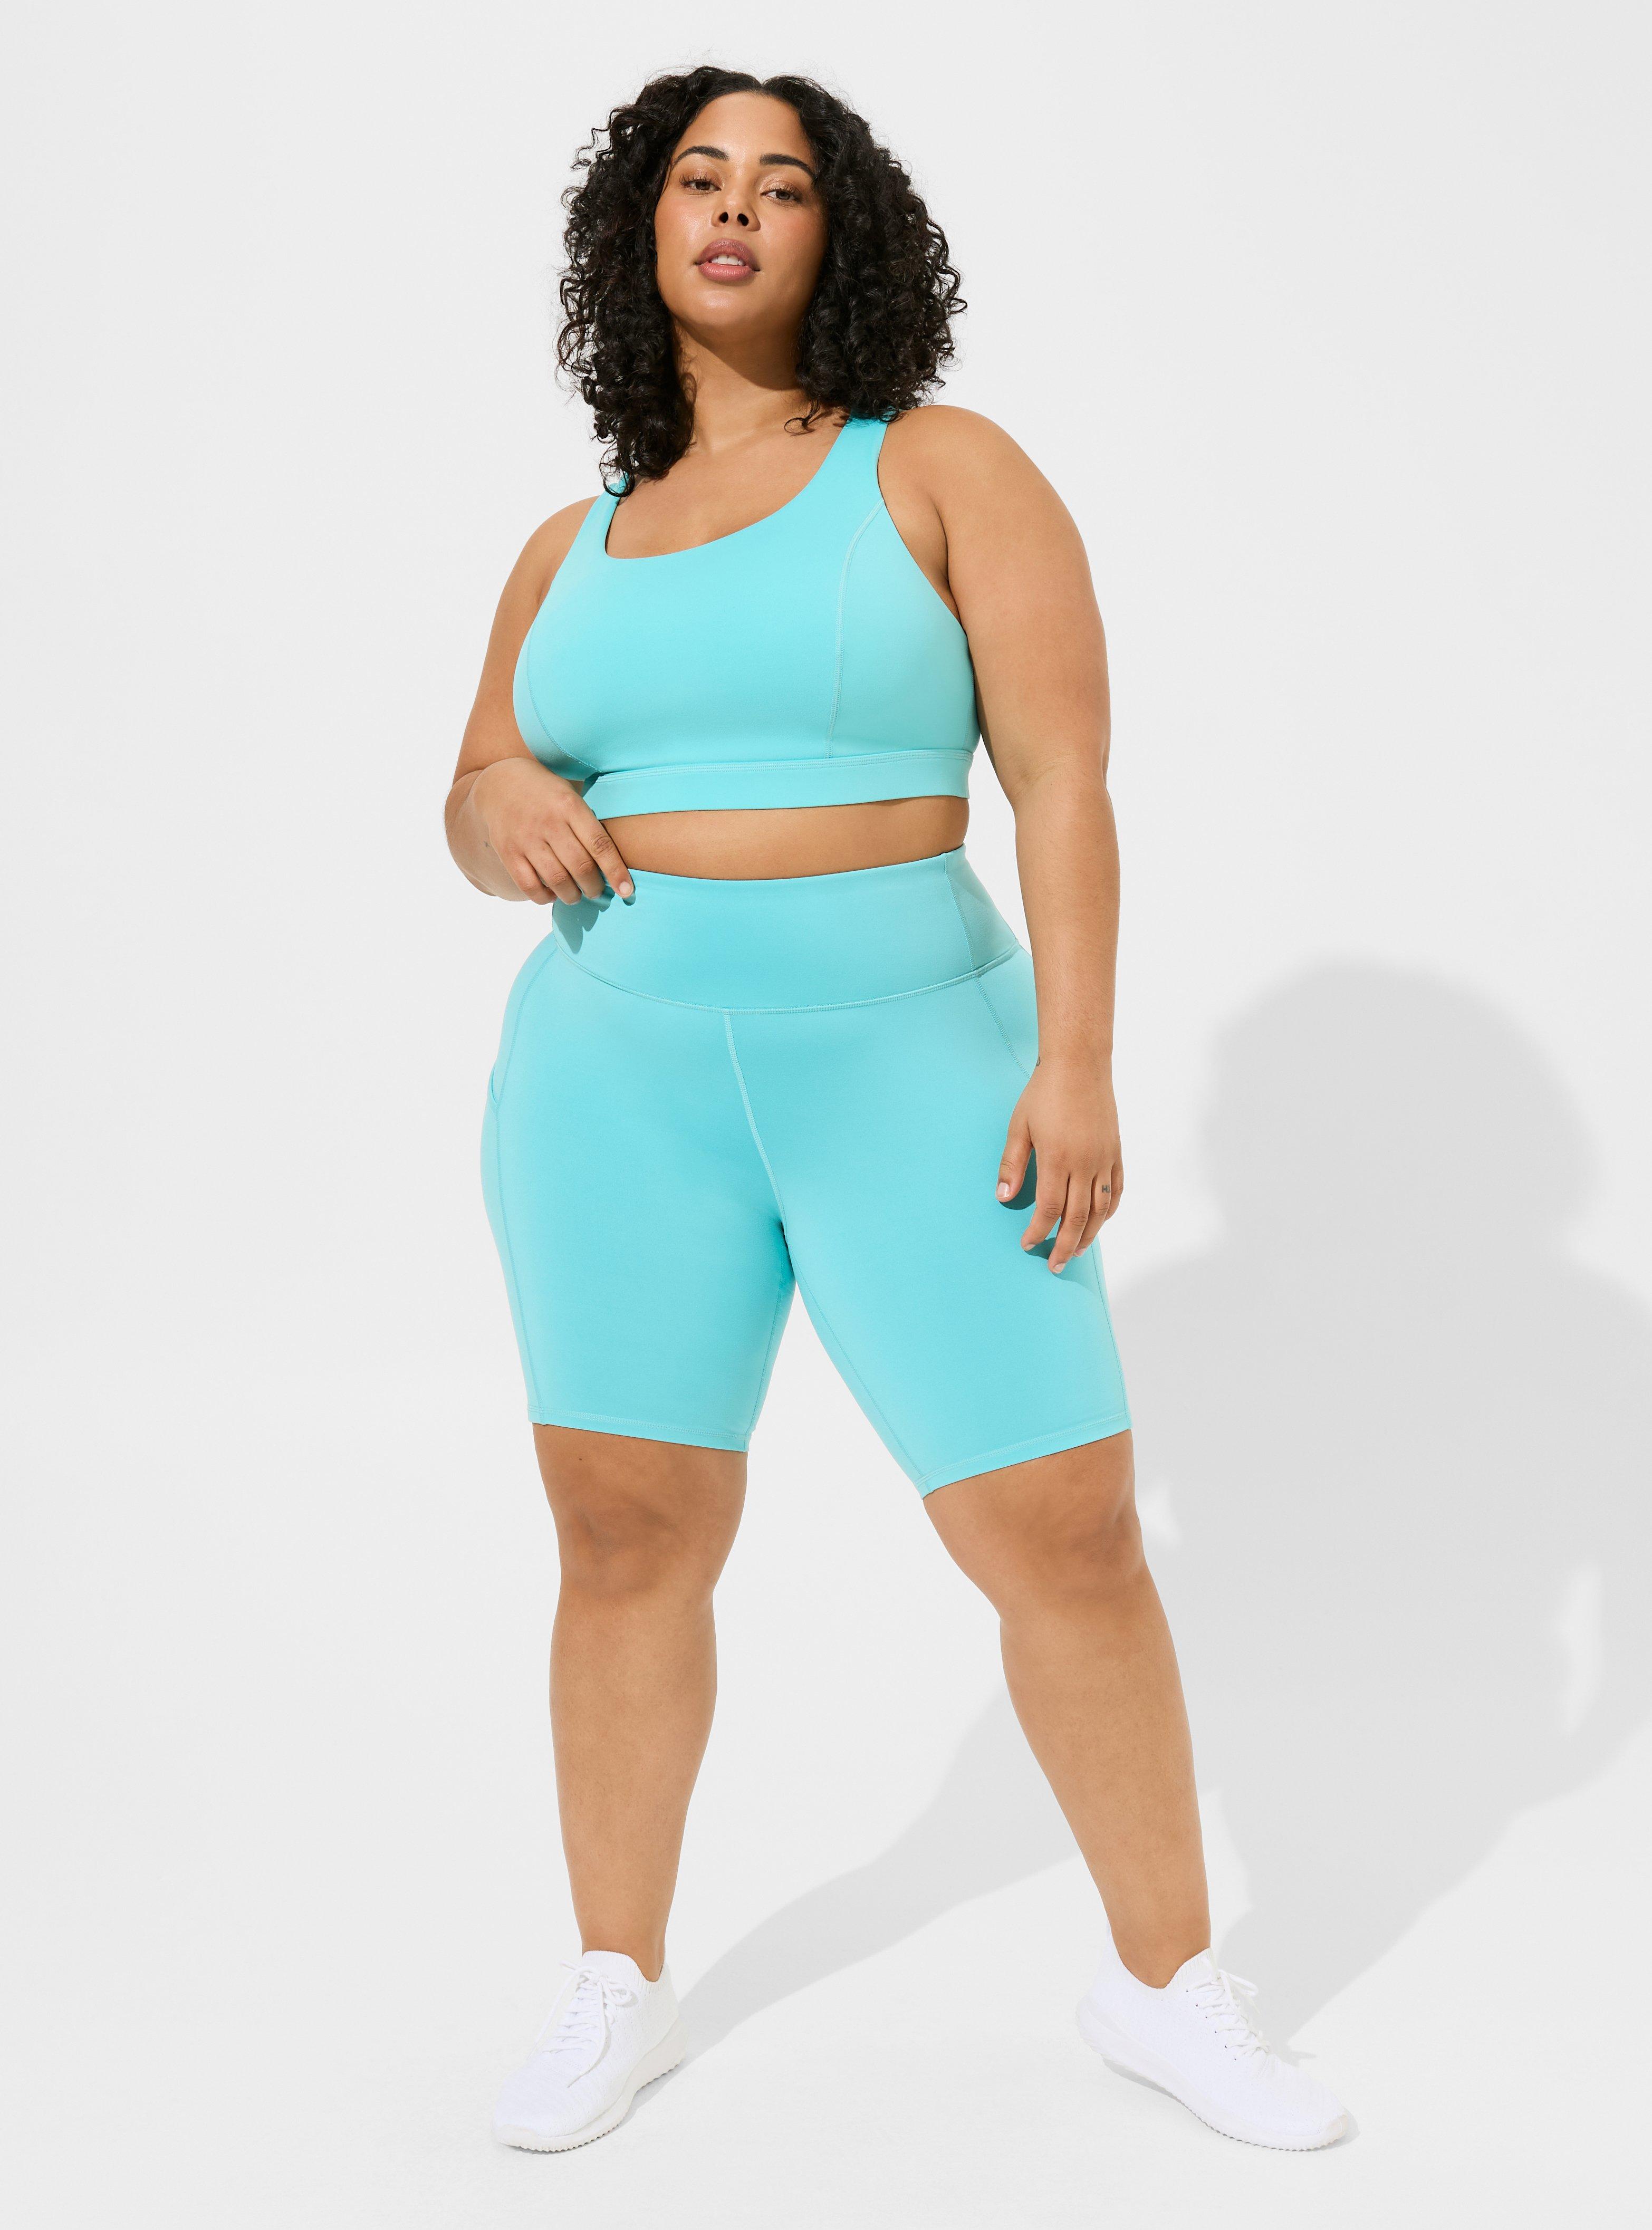 Brushed Microfiber High Waisted Plus Size Sport Leggings with Side Pockets